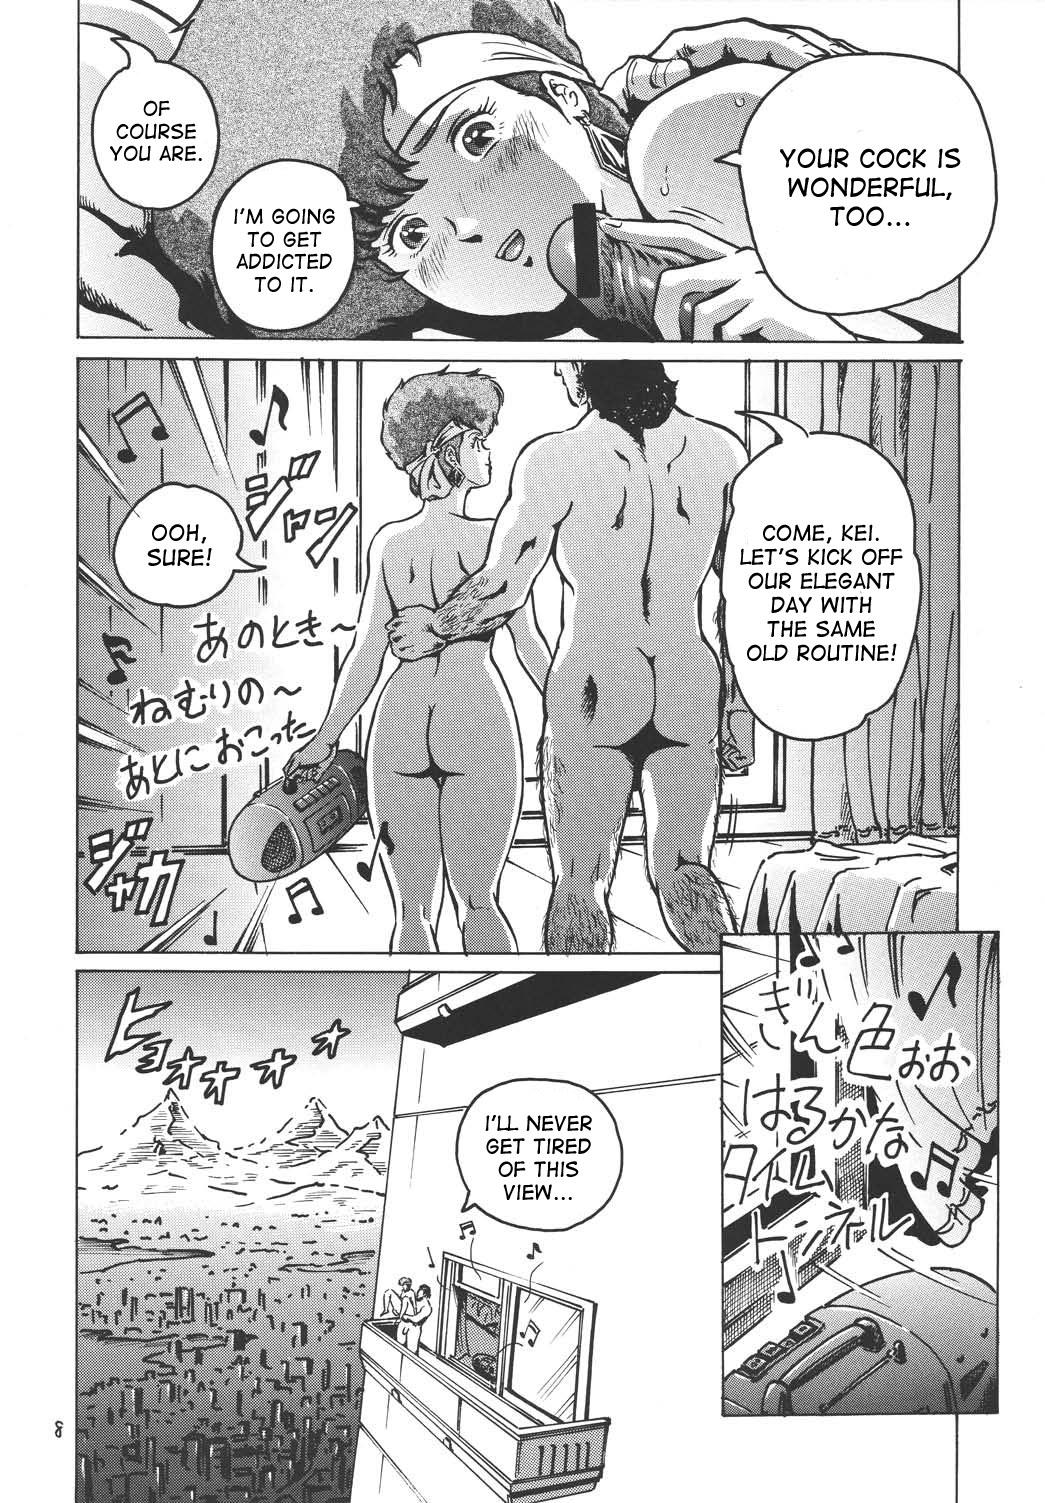 Culo Love Angel - Dirty pair Fingering - Page 7